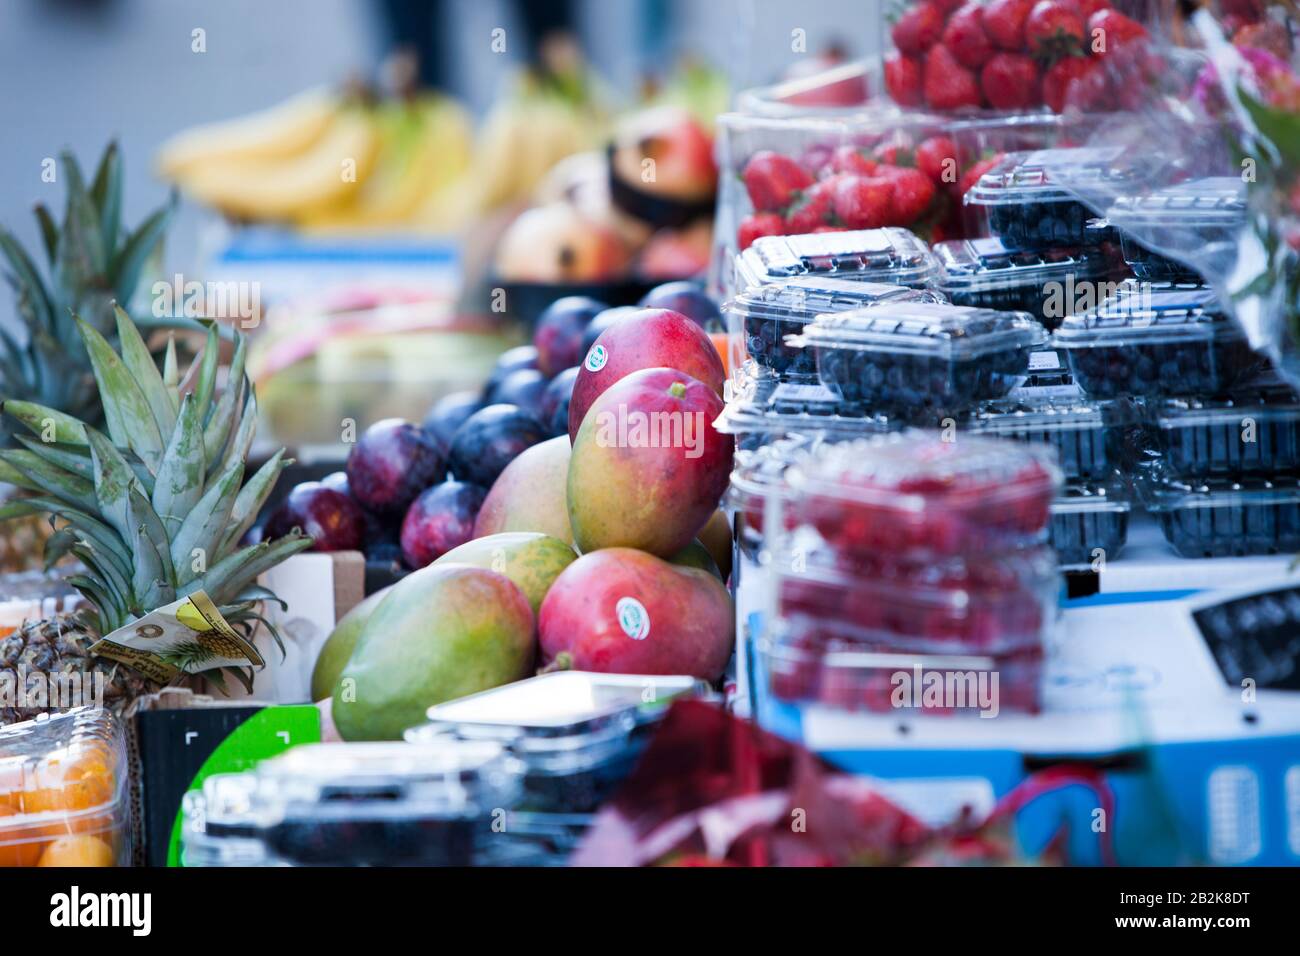 Close-up of fruits for sale Stock Photo